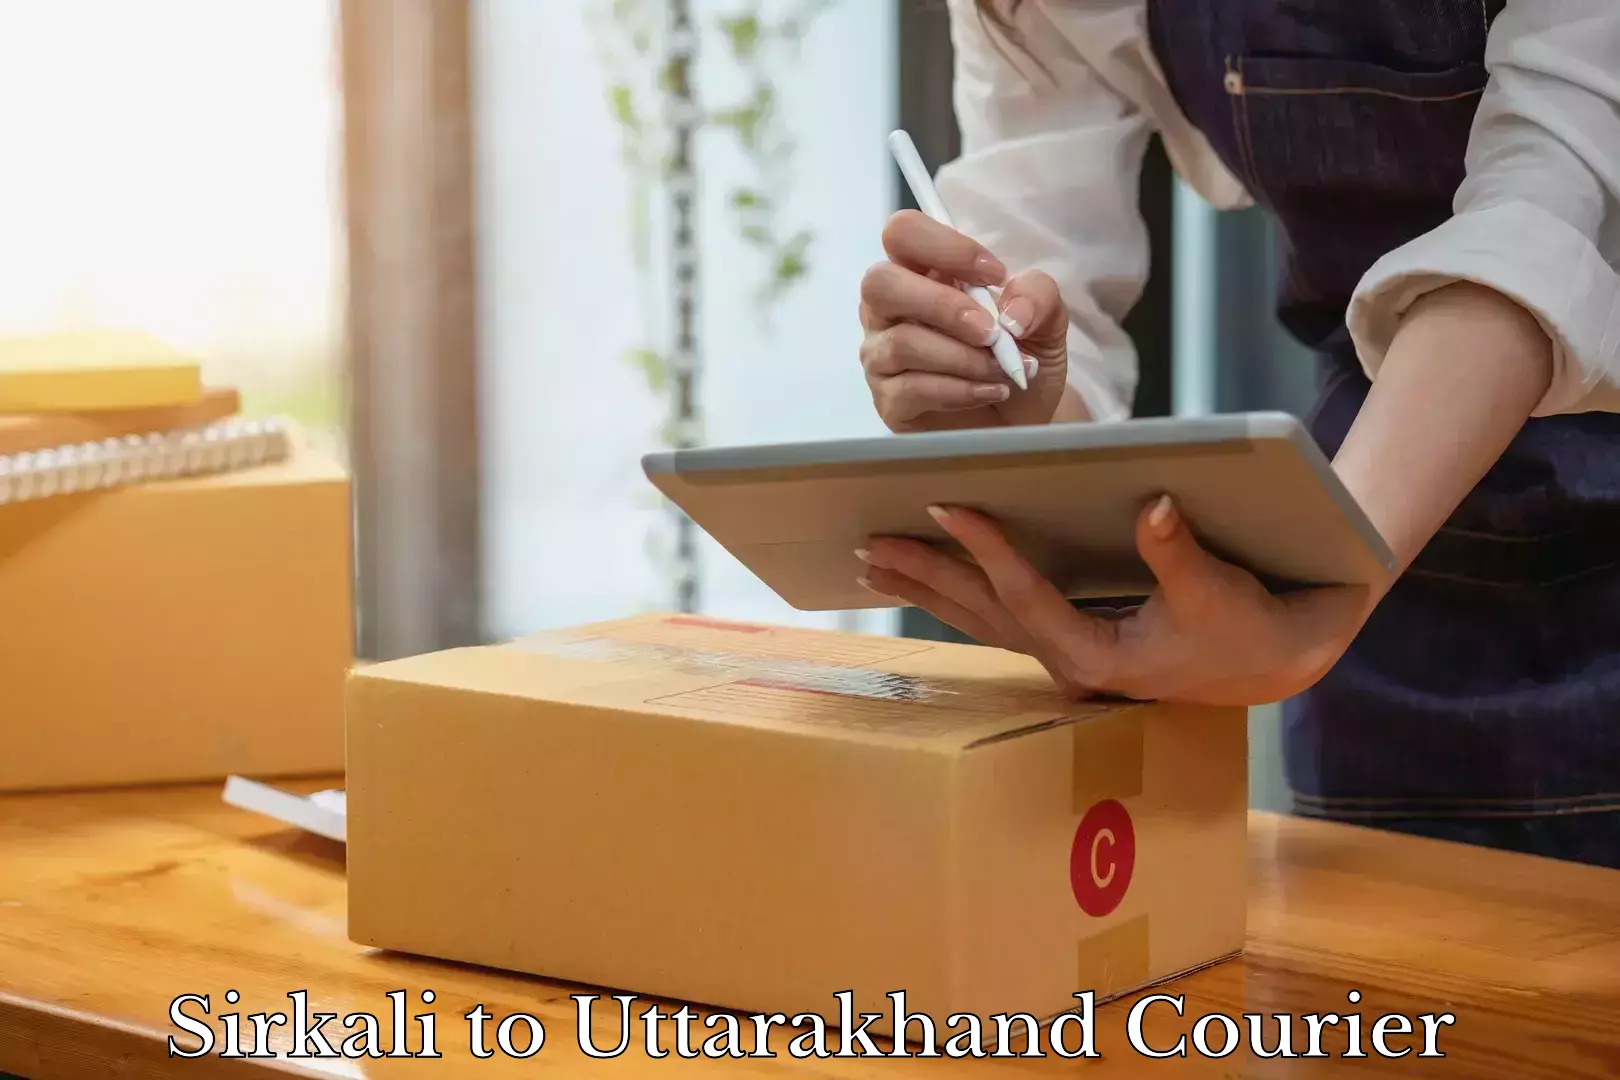 Luggage delivery providers Sirkali to Uttarakhand